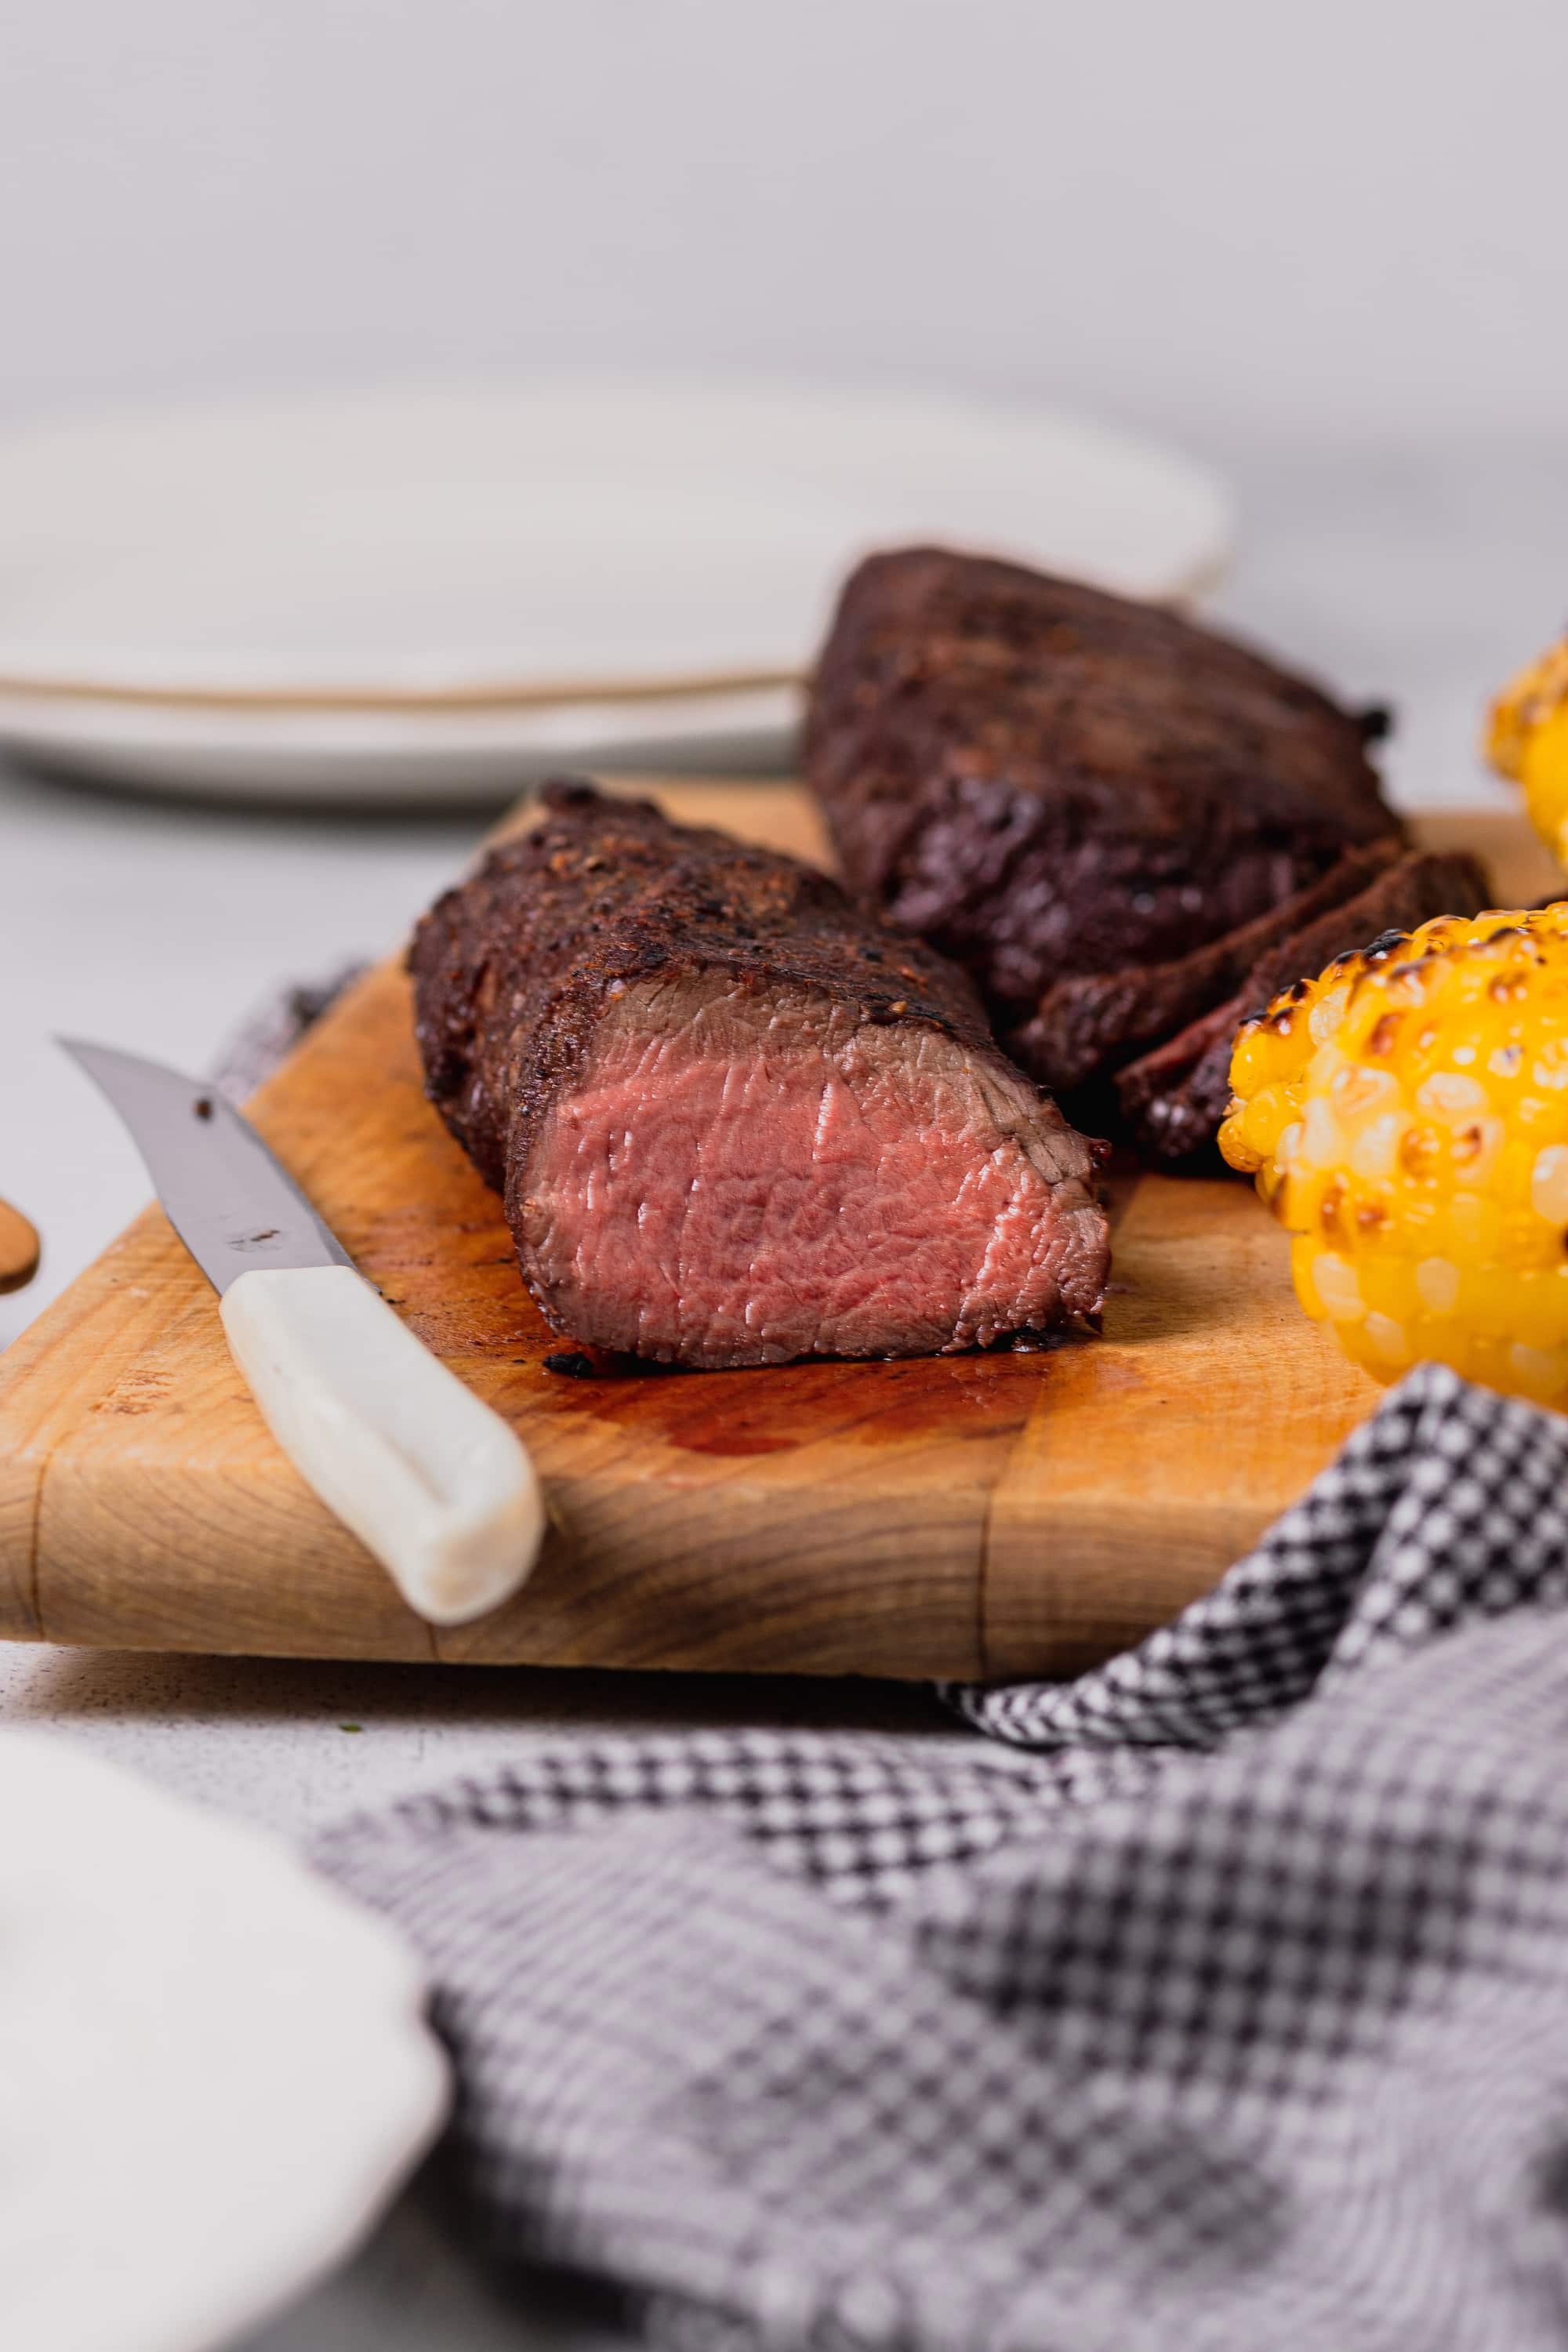 A straight shot of the roast venison's belt has been cut open to reveal the center. The venison is on a wooden cutting board along with the grilled corn.